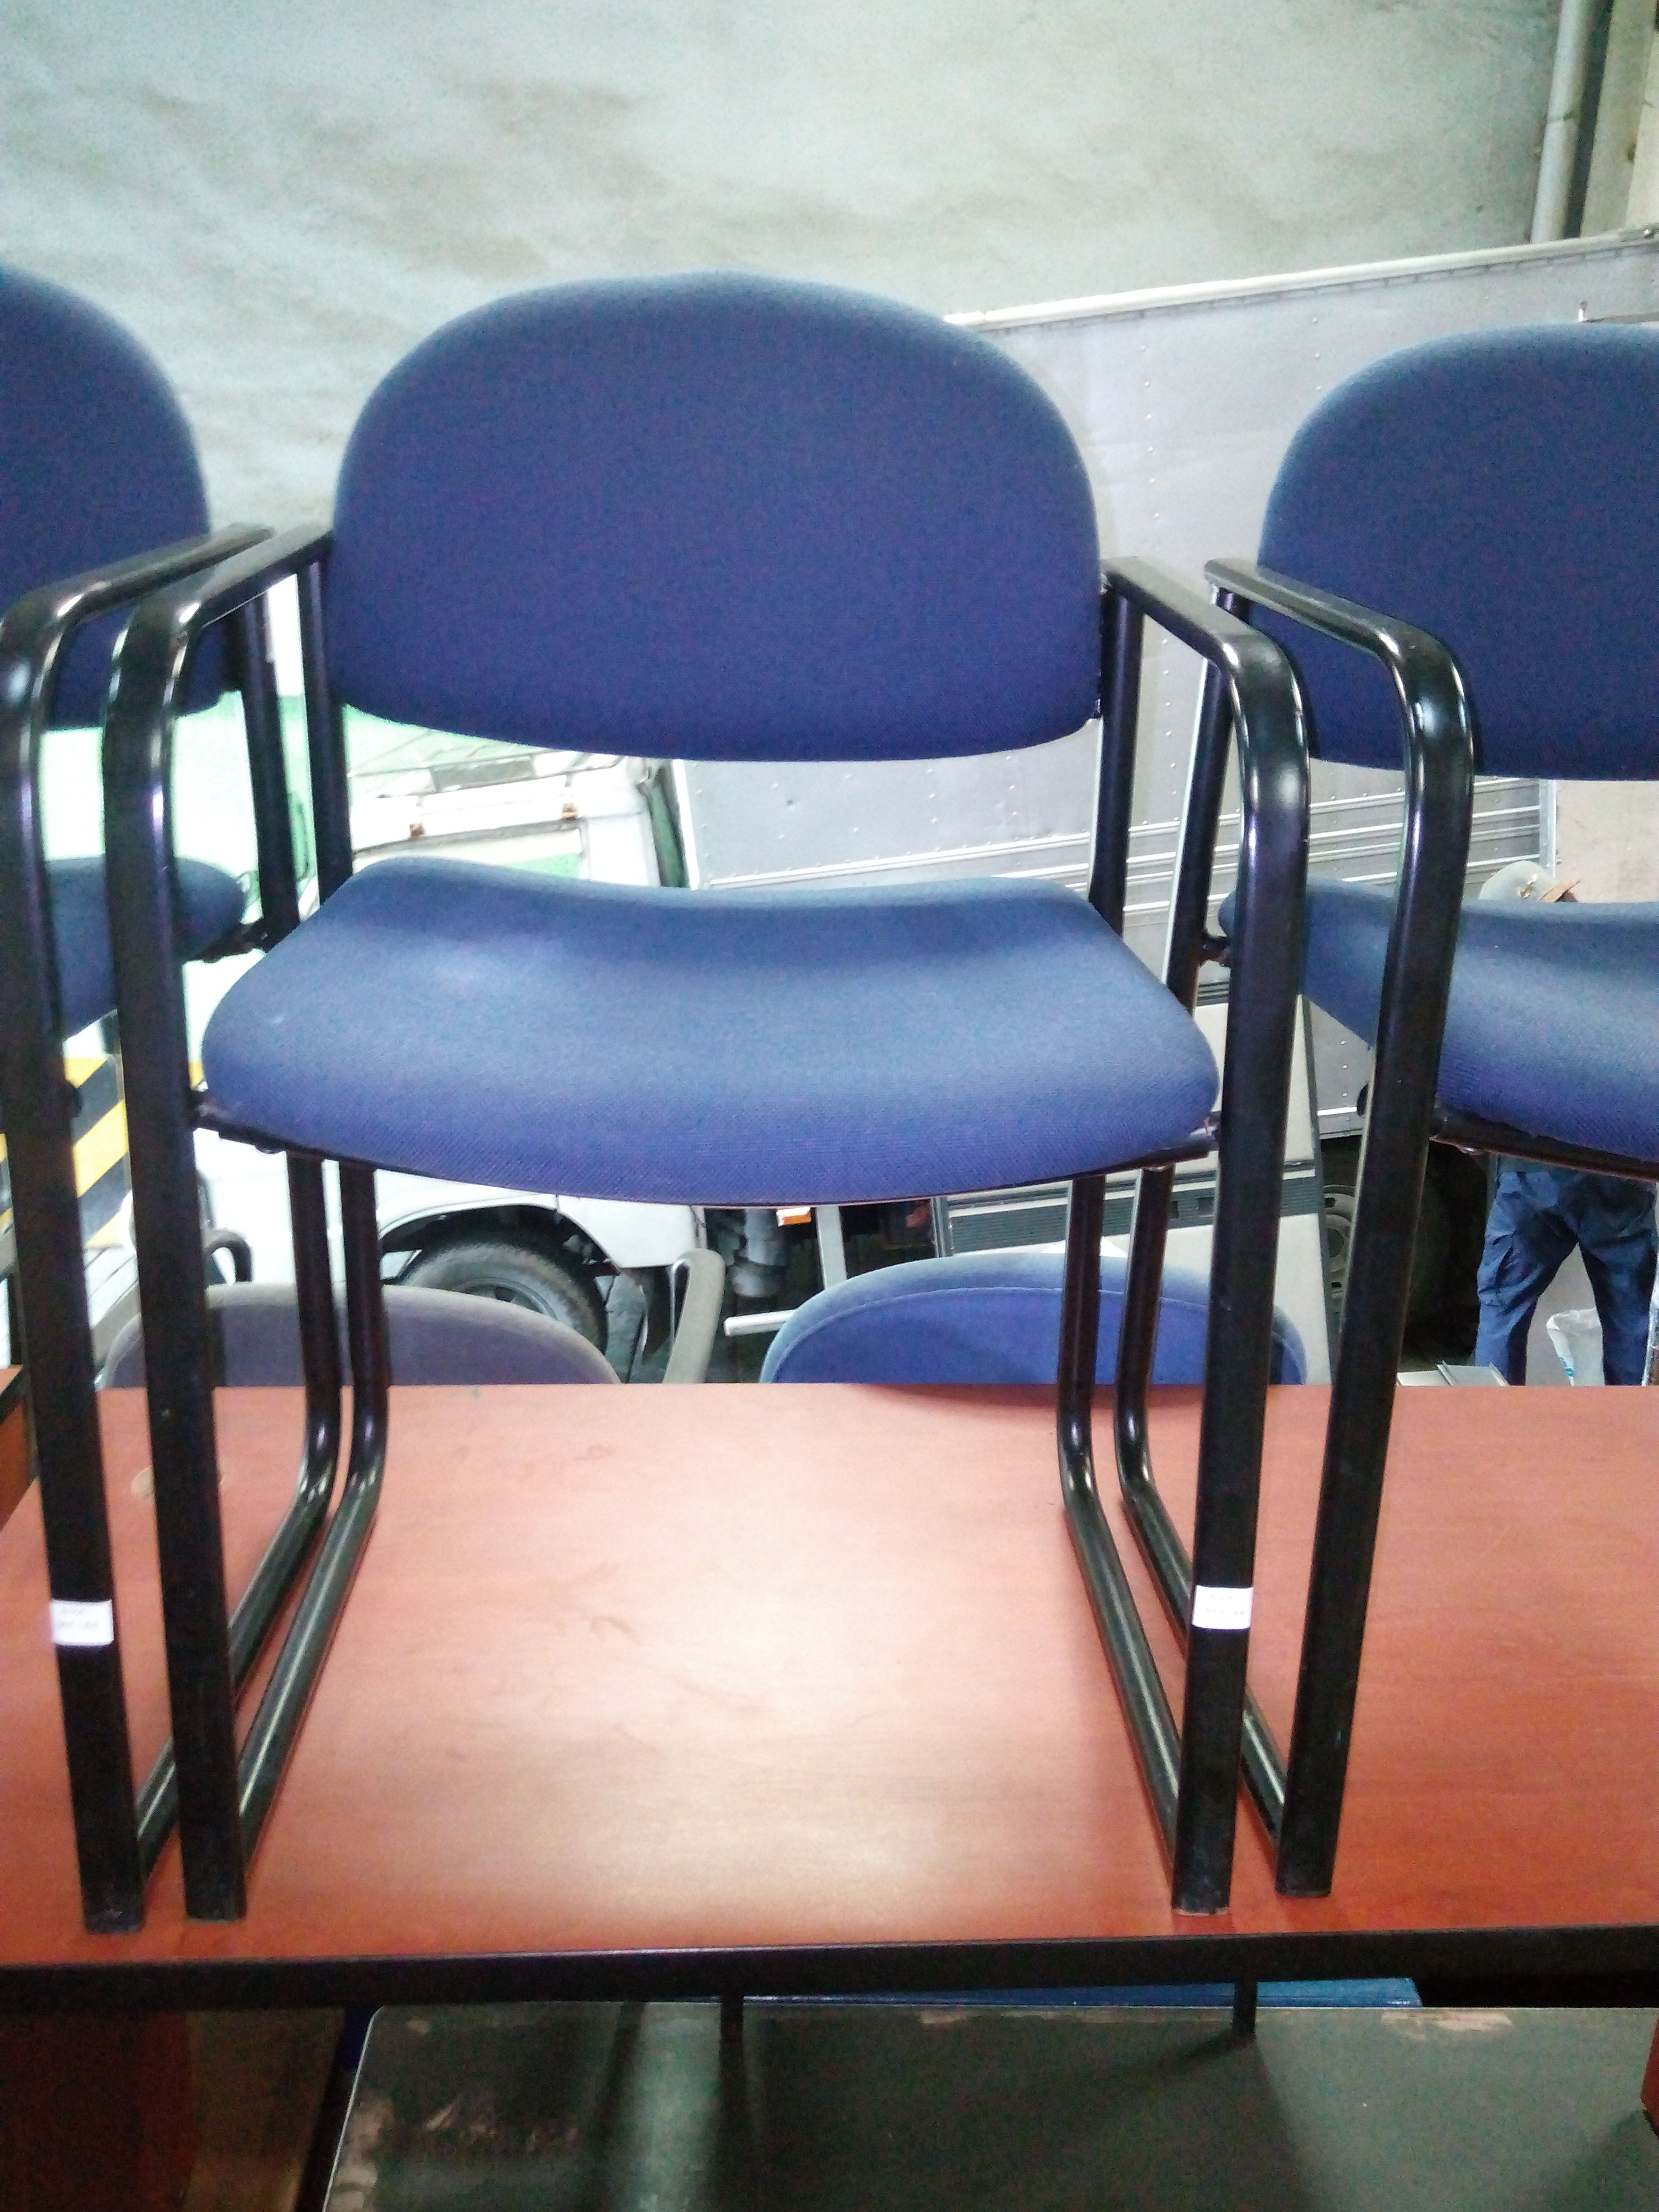 Office Chair | Used Office Furniture Philippines - Part 3